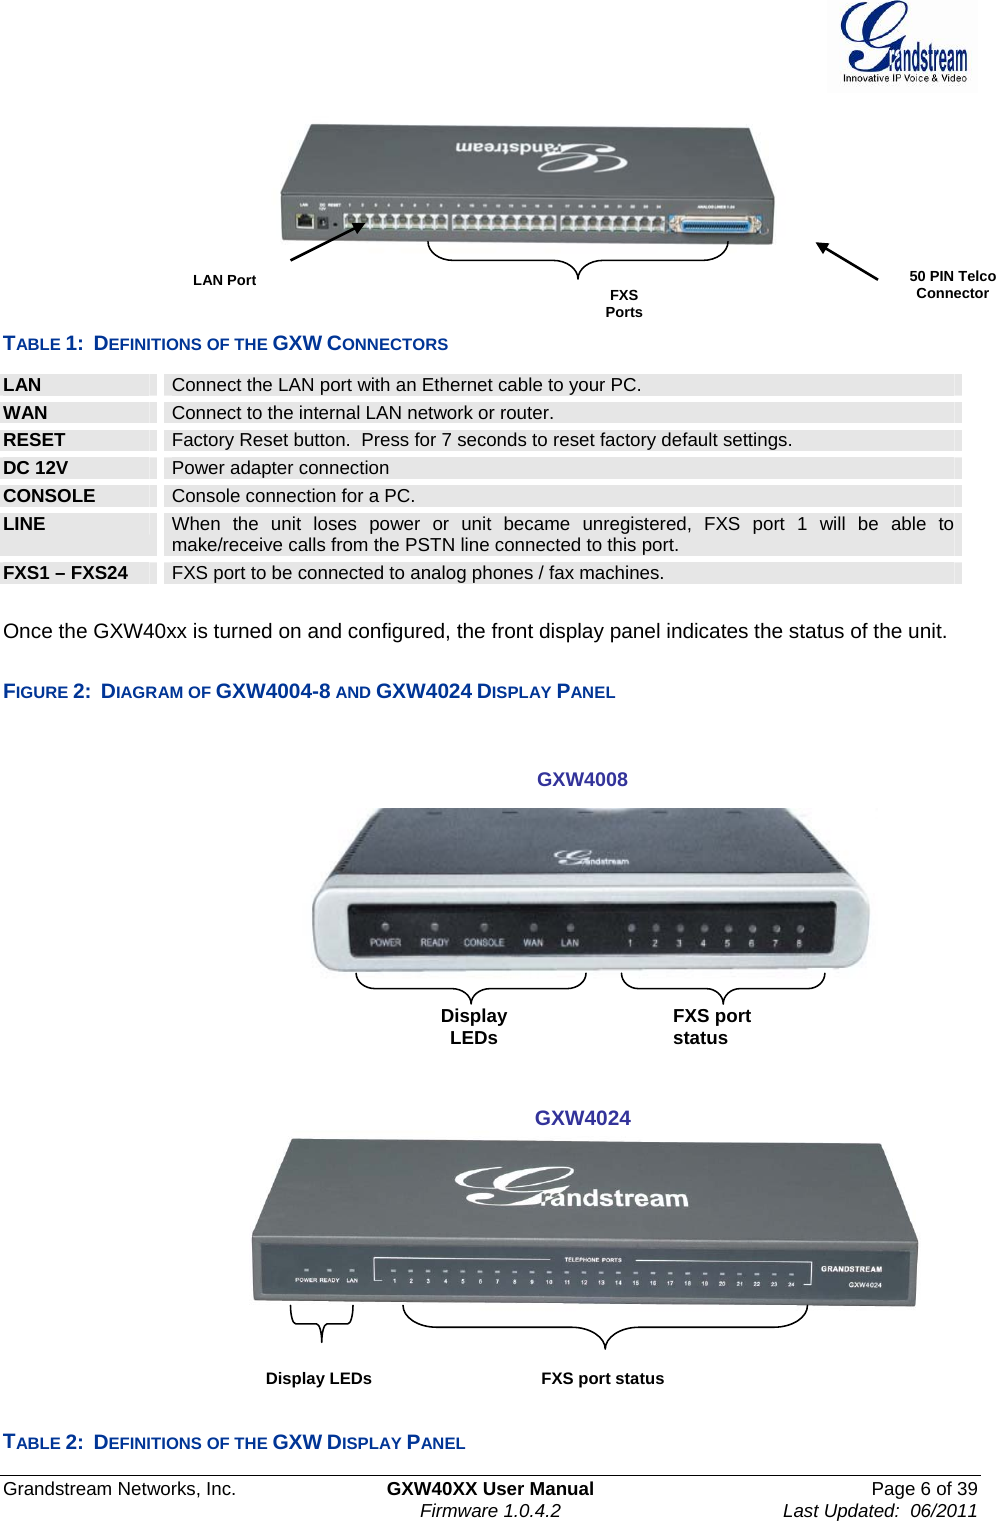  Grandstream Networks, Inc.  GXW40XX User Manual  Page 6 of 39    Firmware 1.0.4.2  Last Updated:  06/2011  LAN Port   TABLE 1:  DEFINITIONS OF THE GXW CONNECTORS LAN   Connect the LAN port with an Ethernet cable to your PC. WAN  Connect to the internal LAN network or router. RESET  Factory Reset button.  Press for 7 seconds to reset factory default settings. DC 12V  Power adapter connection CONSOLE  Console connection for a PC. LINE  When the unit loses power or unit became unregistered, FXS port 1 will be able to make/receive calls from the PSTN line connected to this port. FXS1 – FXS24  FXS port to be connected to analog phones / fax machines.  Once the GXW40xx is turned on and configured, the front display panel indicates the status of the unit.    FIGURE 2:  DIAGRAM OF GXW4004-8 AND GXW4024 DISPLAY PANEL       TABLE 2:  DEFINITIONS OF THE GXW DISPLAY PANEL FXS port status GXW4008  Display LEDs Display LEDs  FXS port status GXW4024 50 PIN Telco Connector FXS Ports 